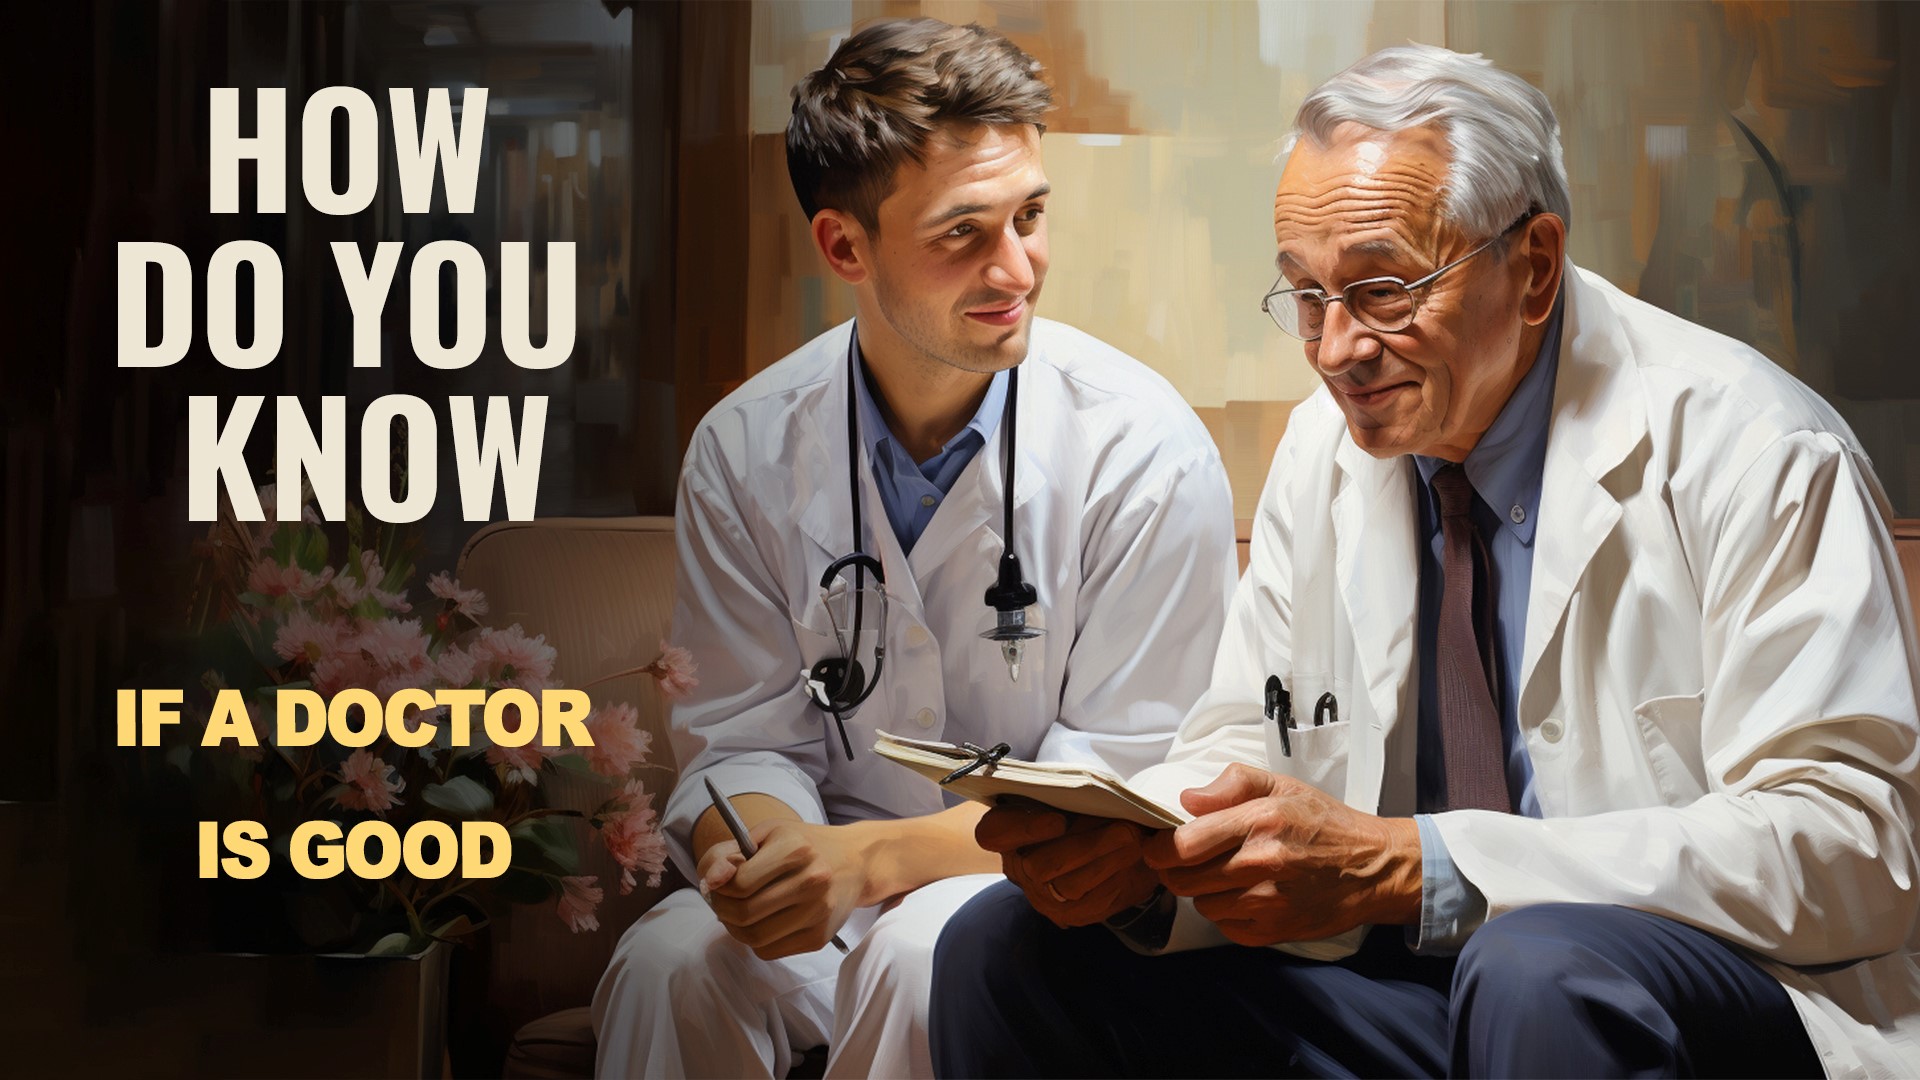 How do you know if a doctor is good?